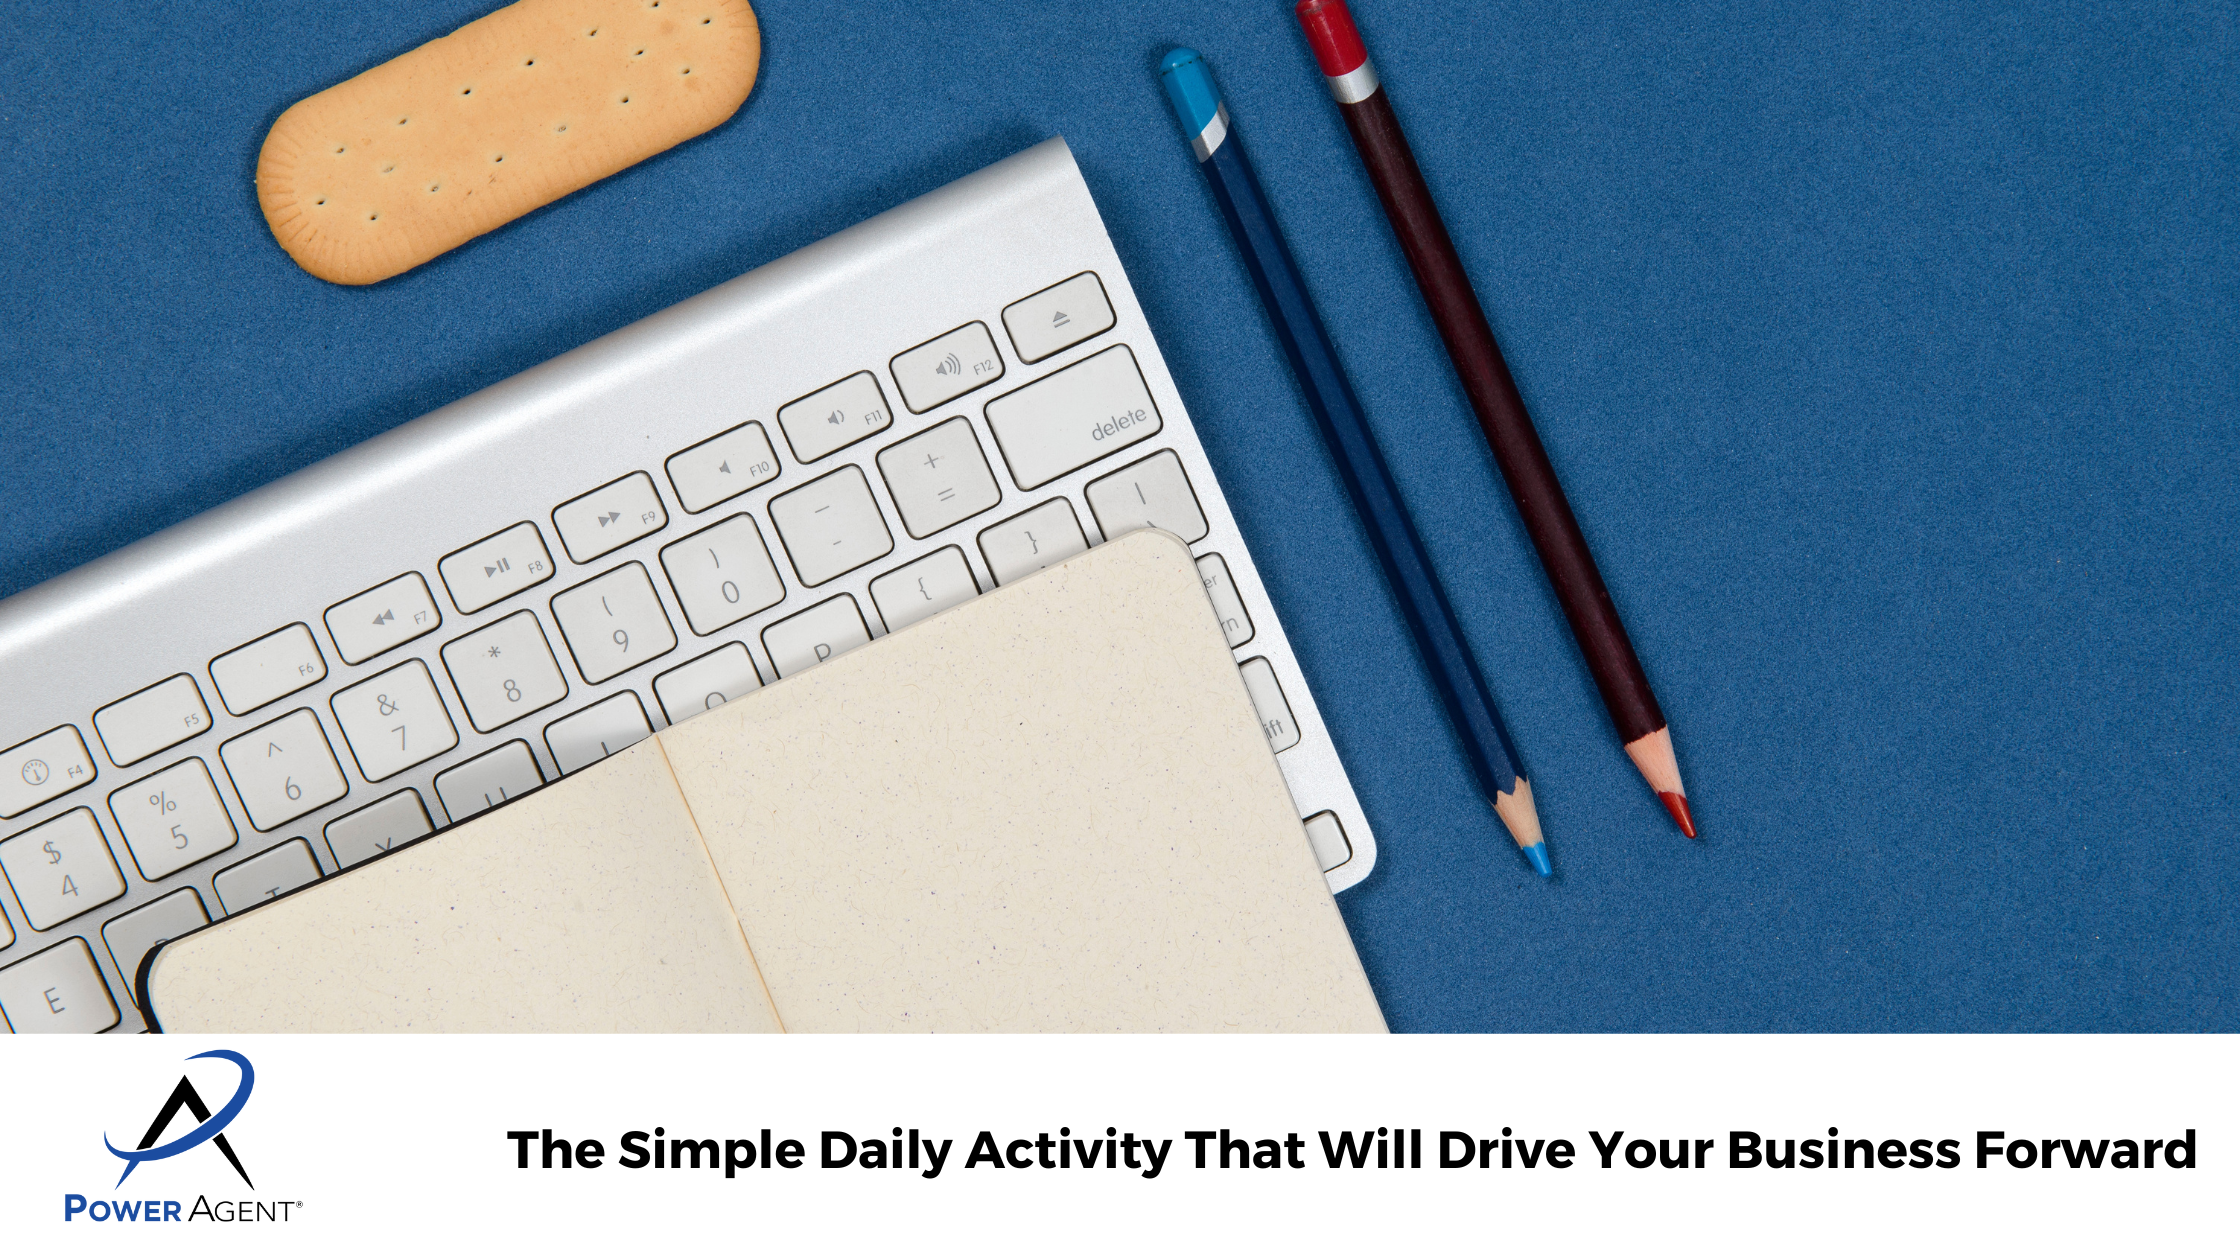 The Simple Daily Activity That Will Drive Your Business Forward